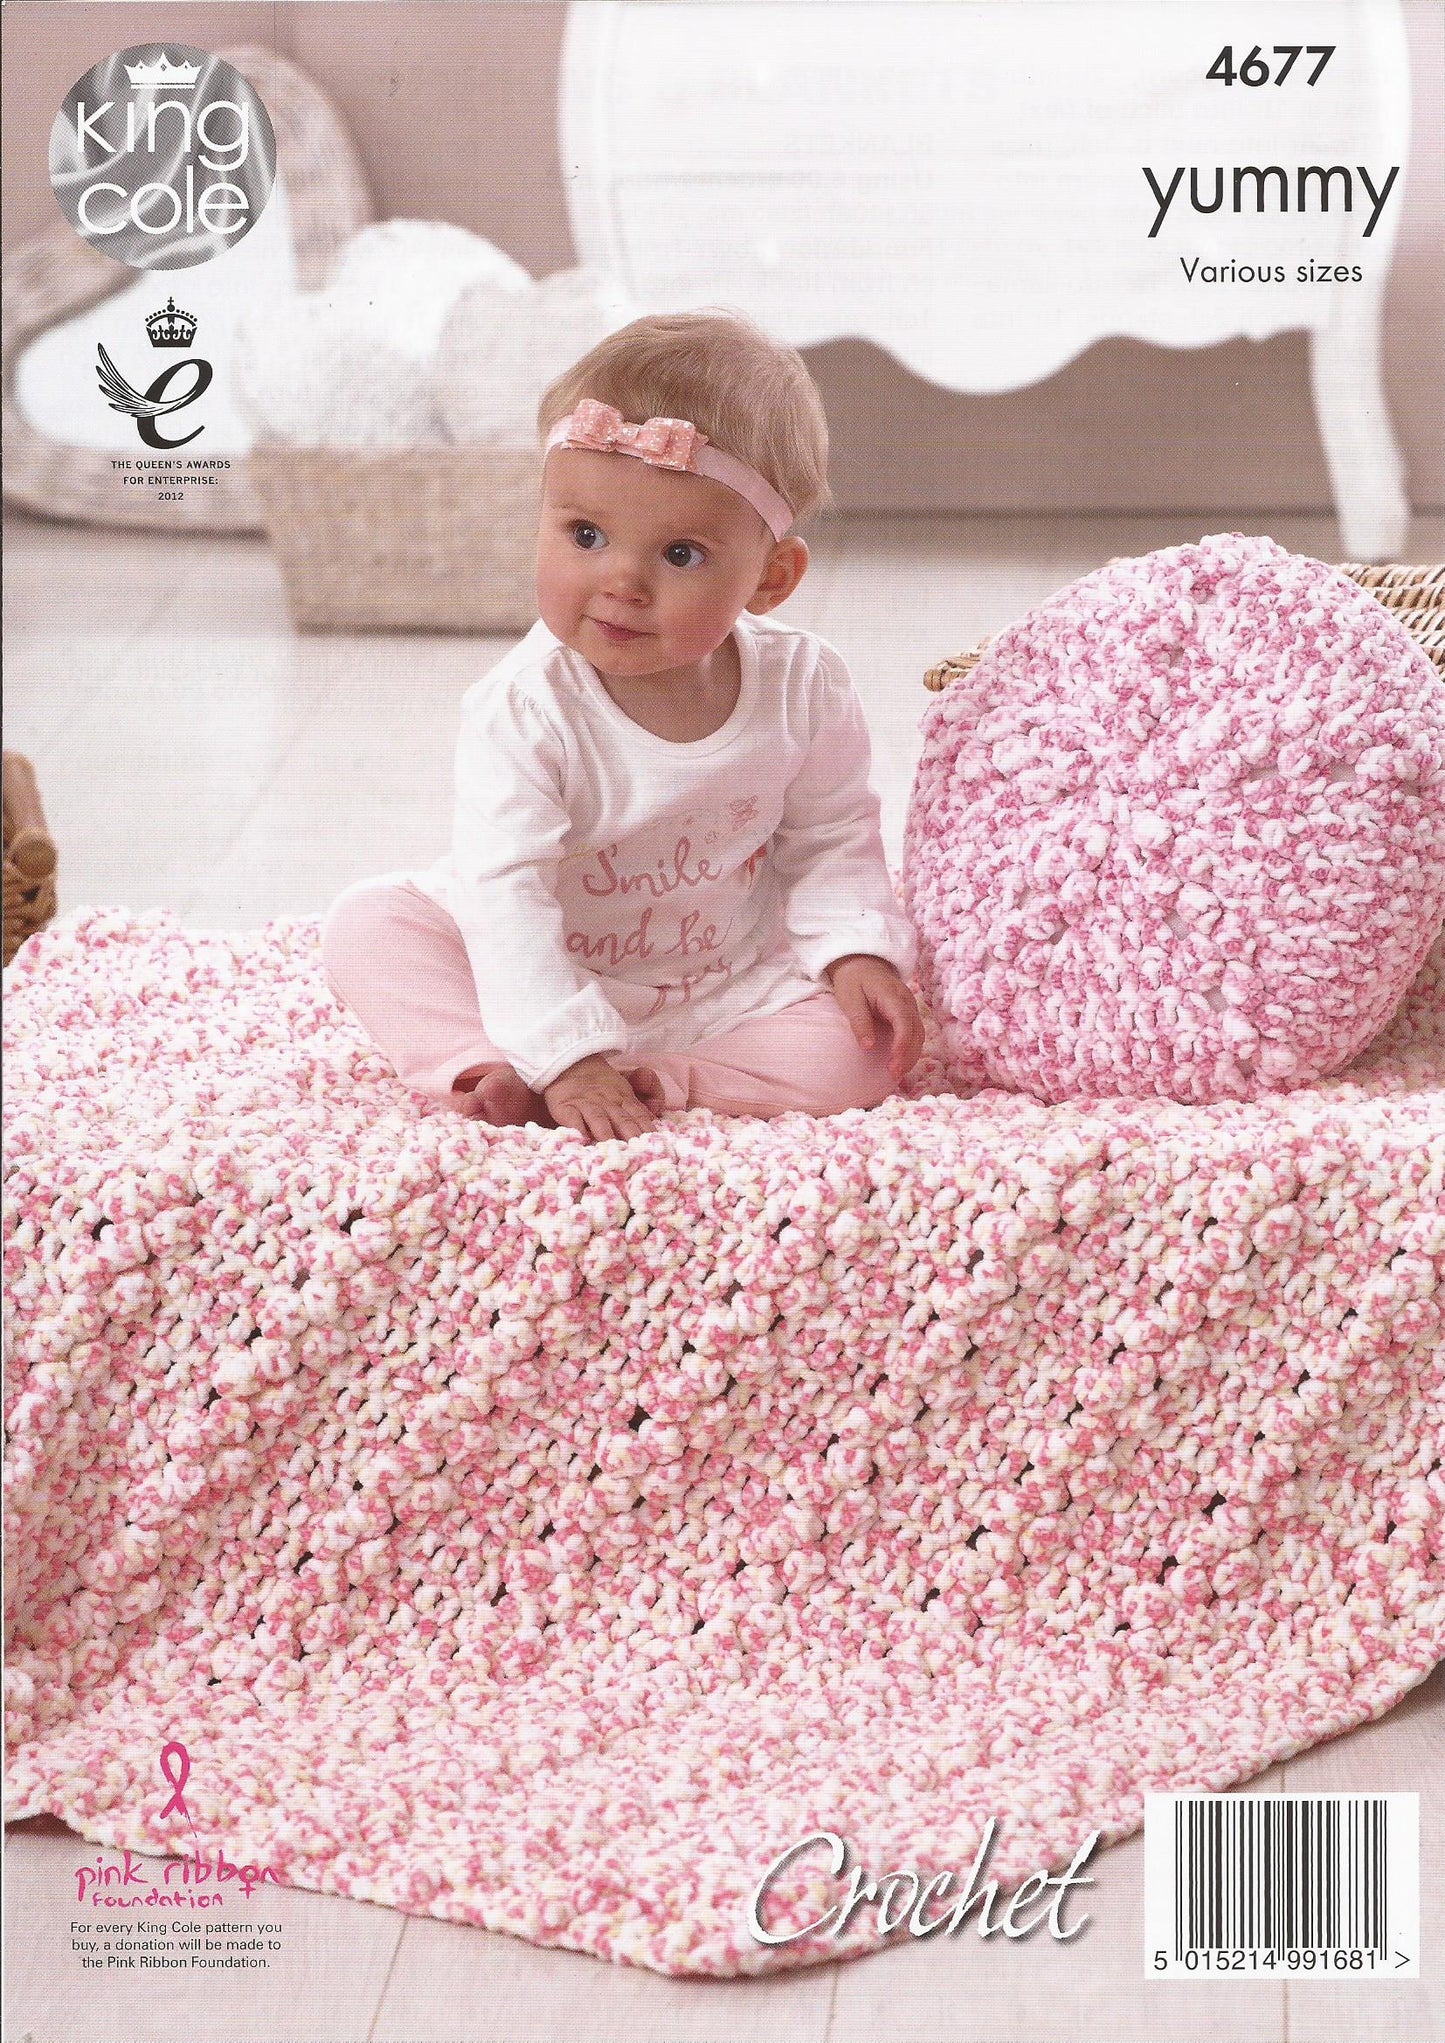 King Cole 4677 Cushions and Blankets Yummy Chunky Crochet Pattern